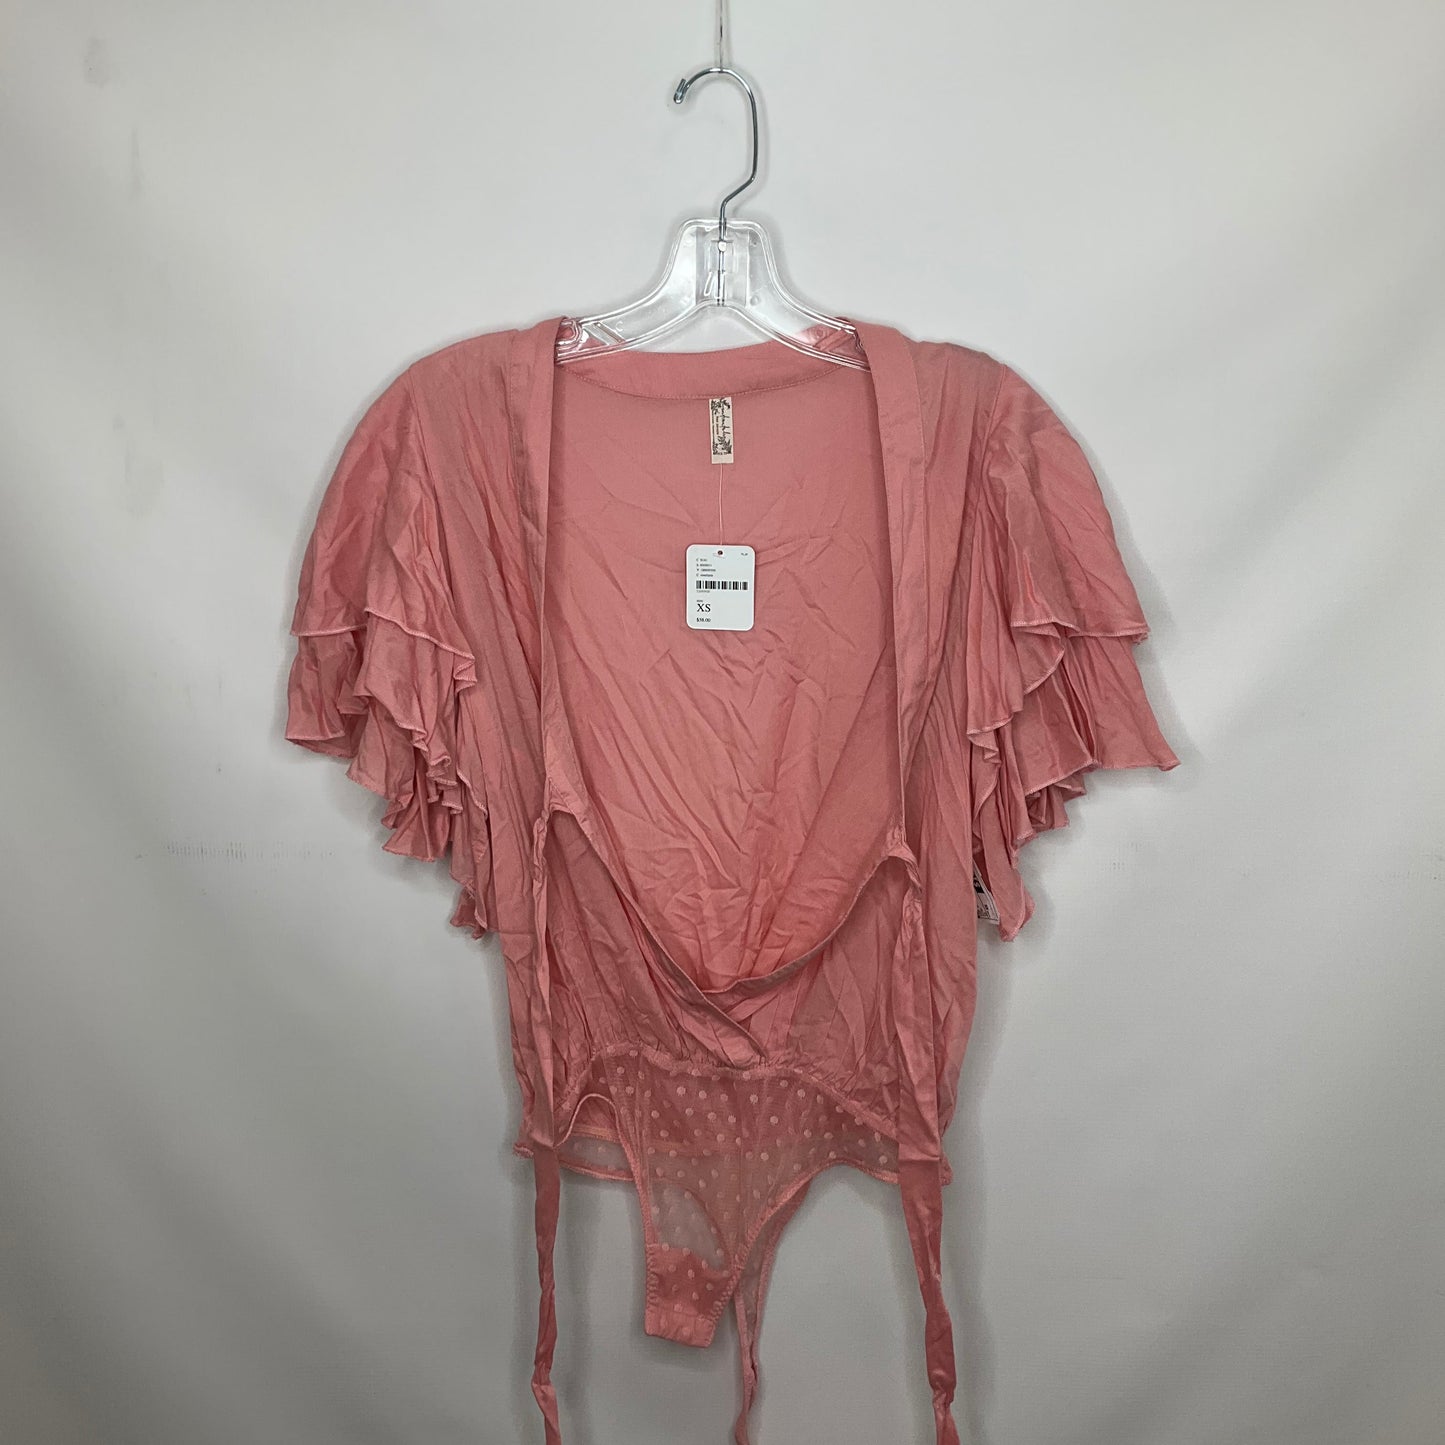 Pink Top short Sleeve Free People, Size Xs